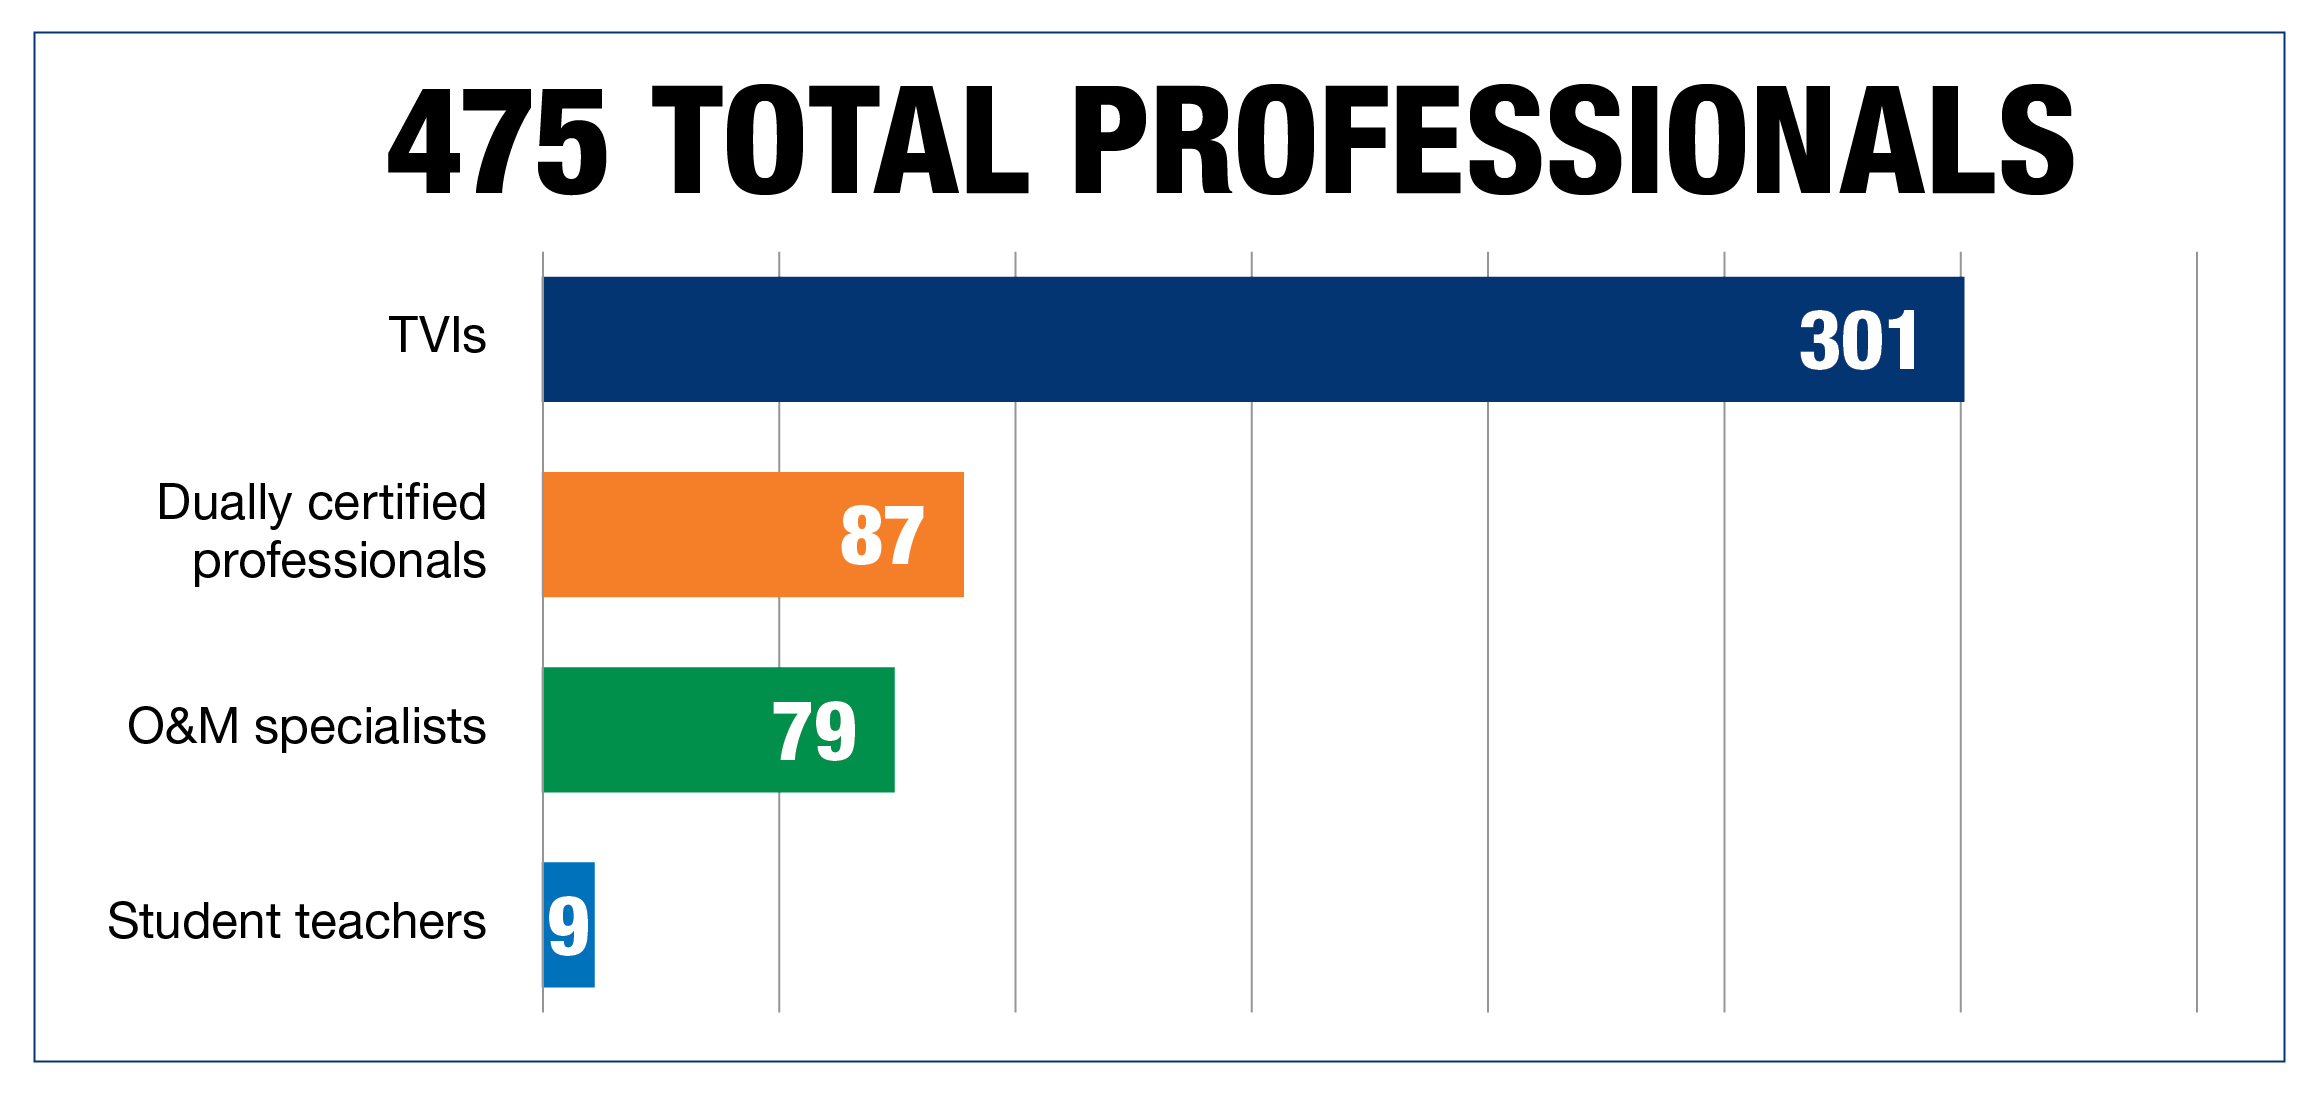 Bar graph showing the 475 total professionals represented: 301 TVIs, 87 dually certified professionals, 79 O&M specialists, and 9 student teachers. 